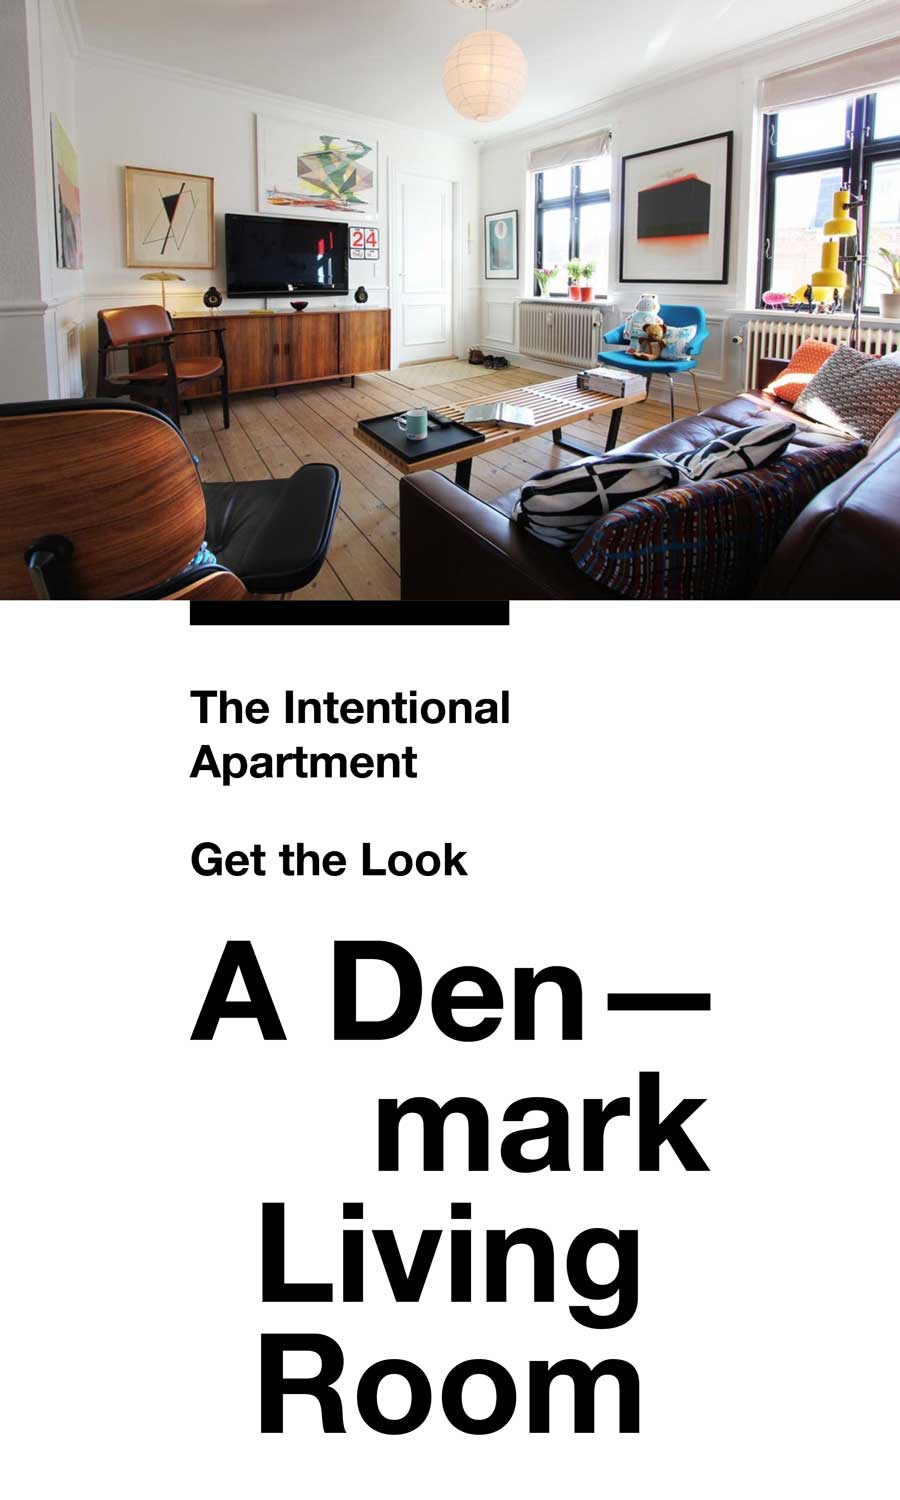 The Intentional Apartment: Get the Look   A Denmark Living Room